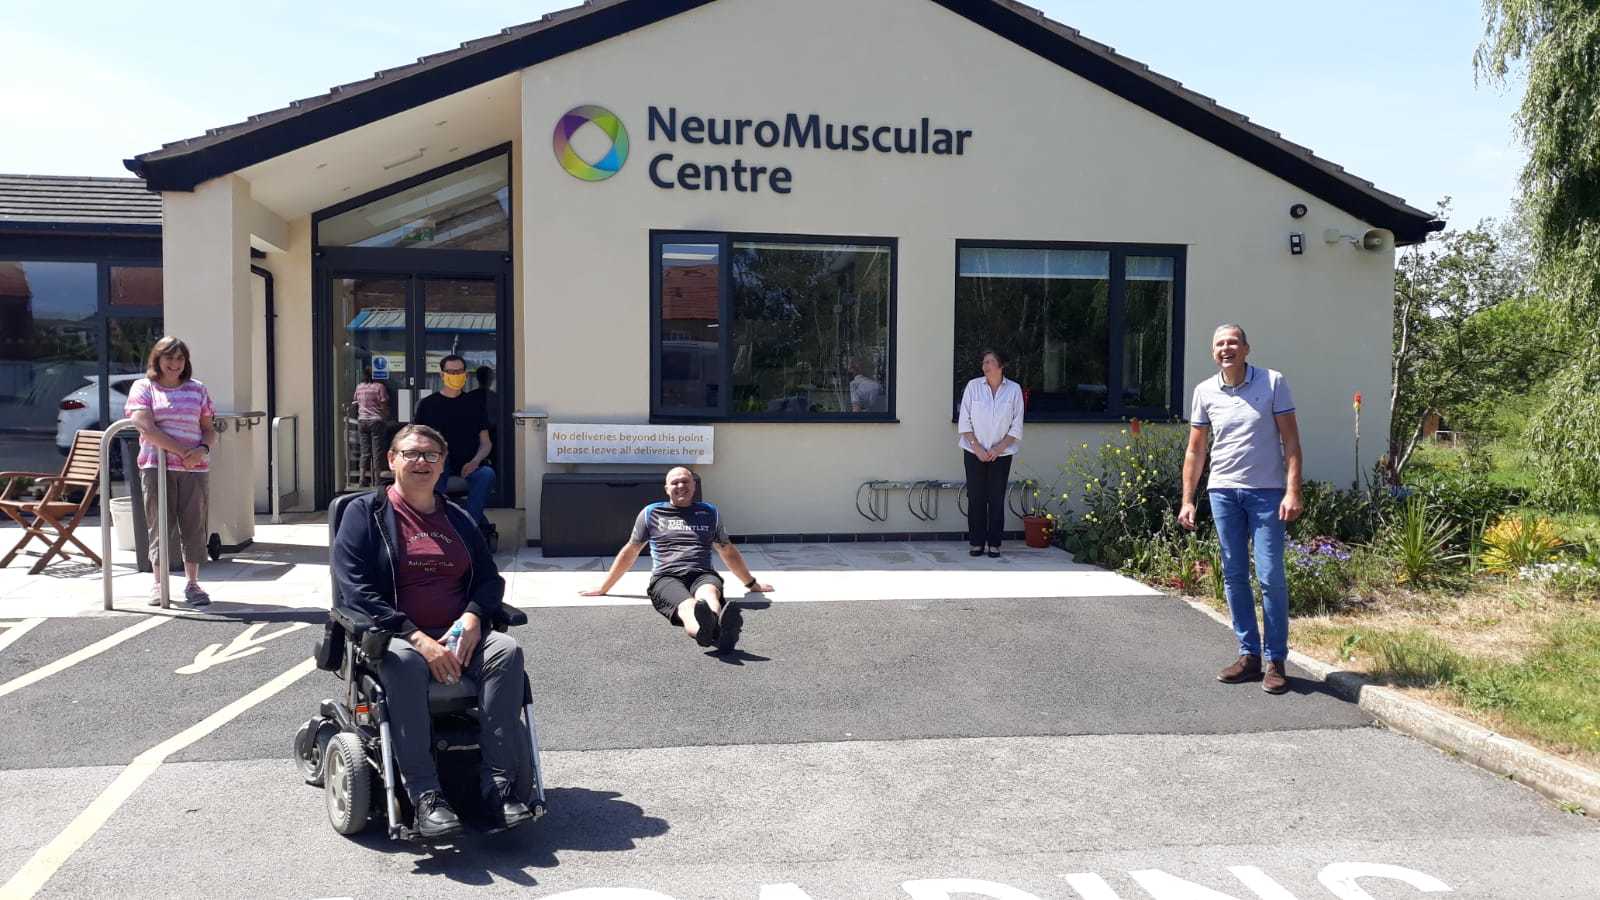 The NeuroMuscular is a centre of excellence and the only one of its kind in the UK and Europe